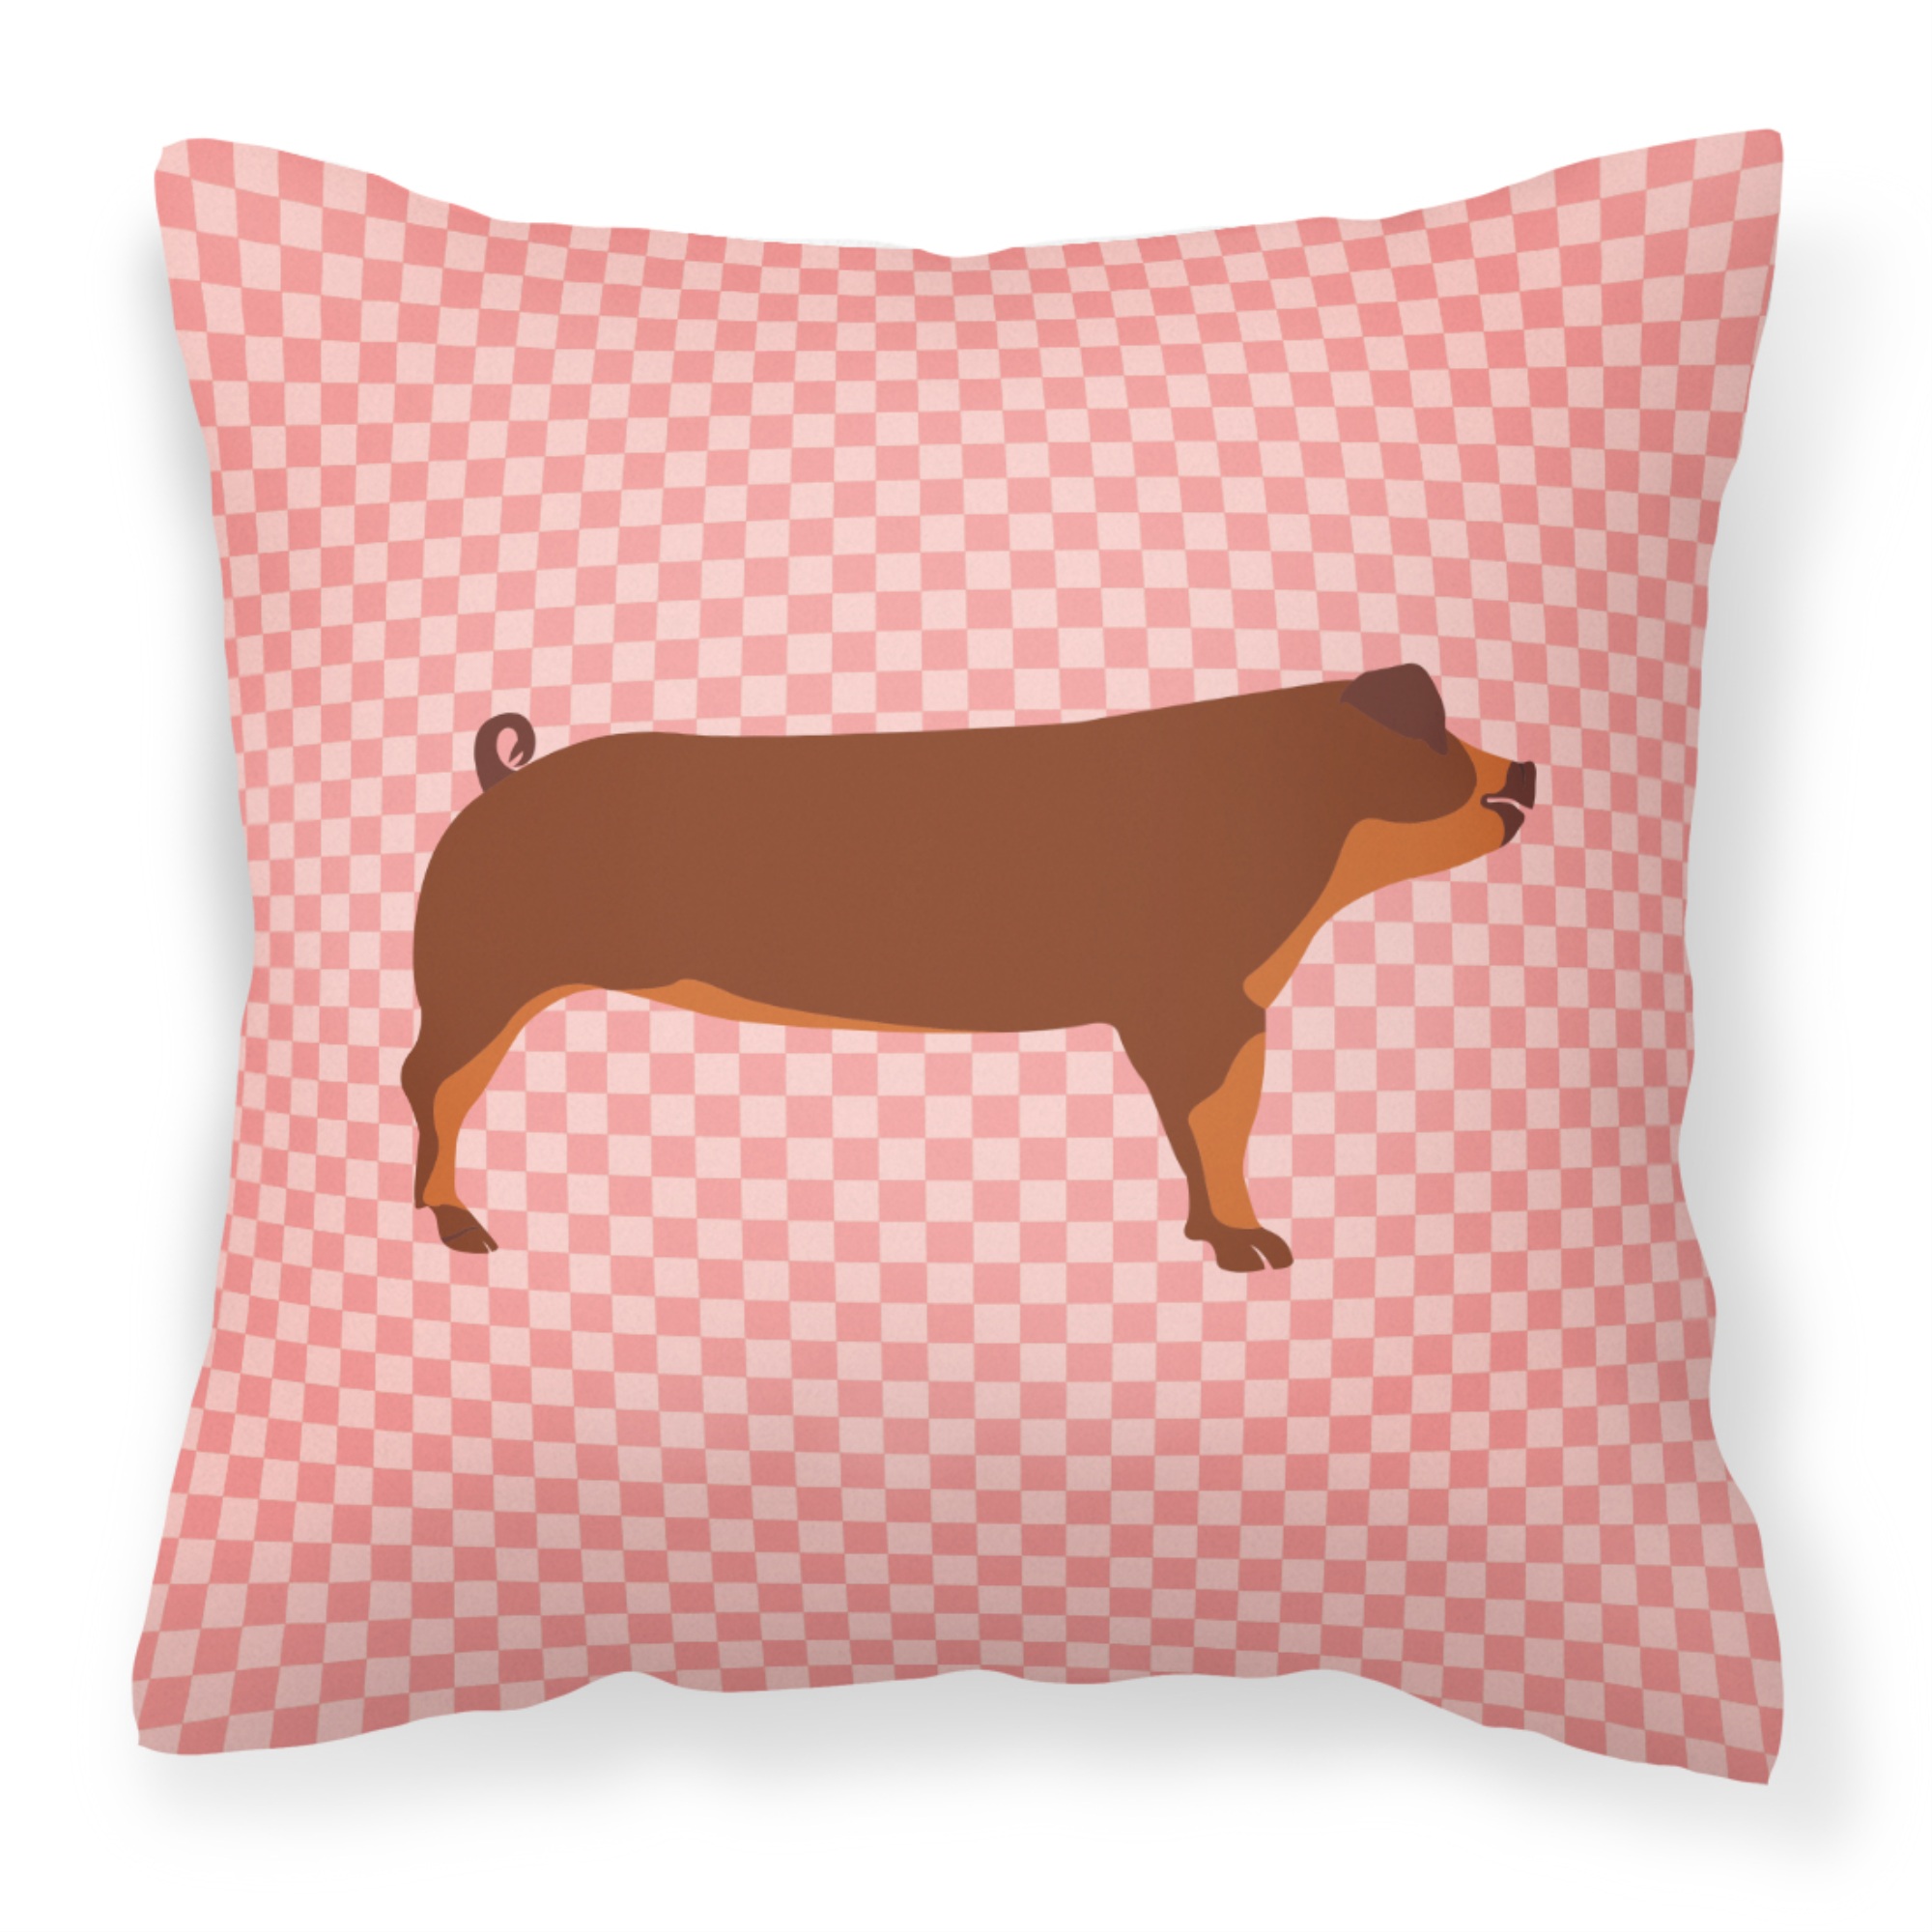 Caroline's Treasures "Caroline's Treasures BB7942PW1818 Duroc Pig Pink Check Outdoor Canvas Fabric Decorative Pillow, Multicolor"